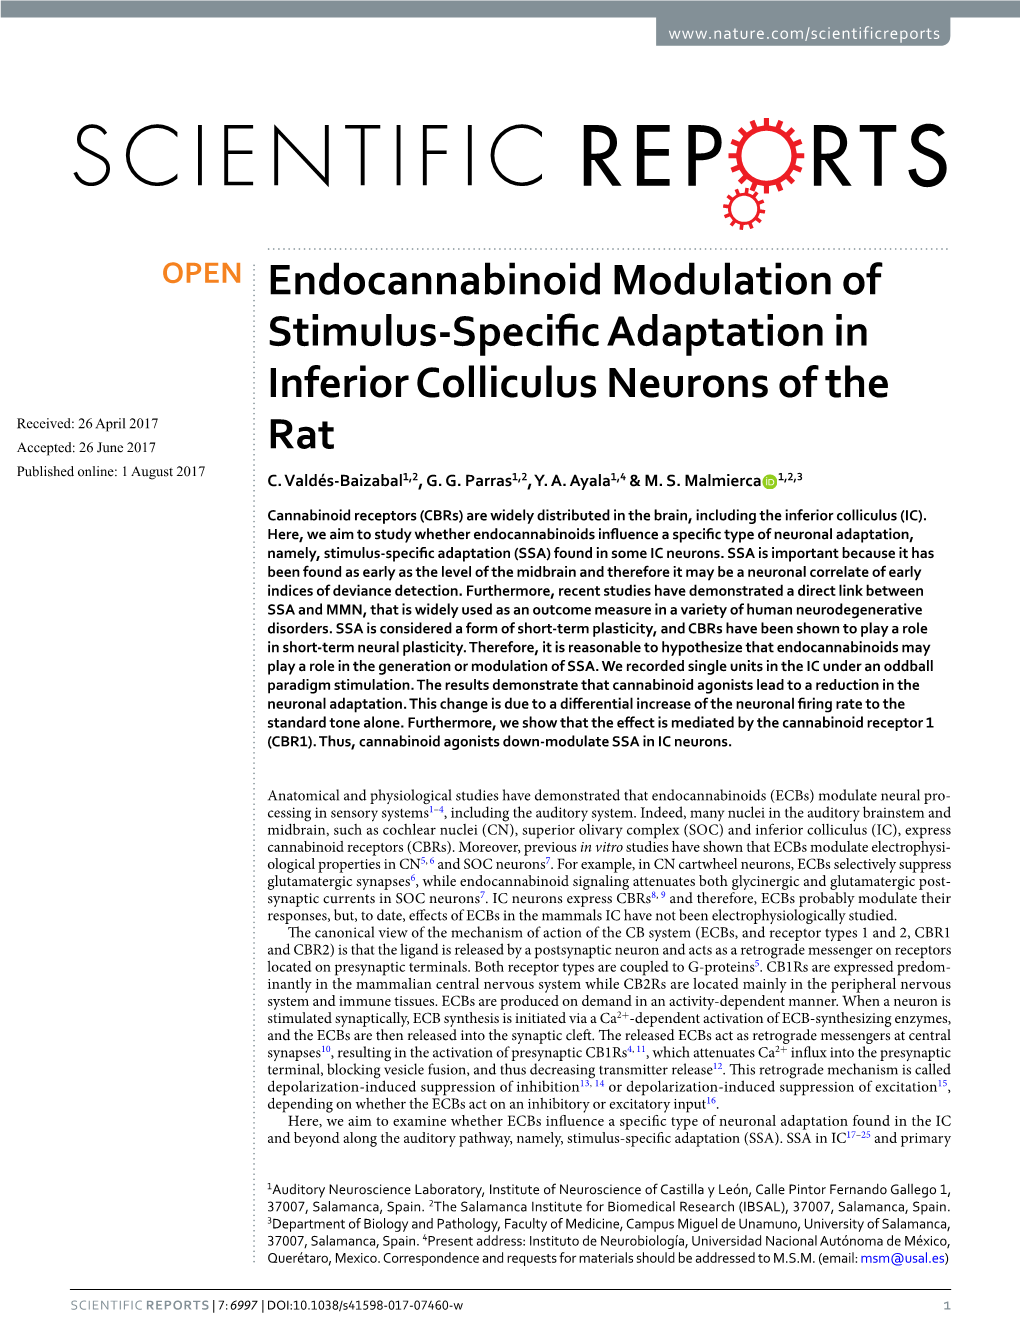 Endocannabinoid Modulation of Stimulus-Specific Adaptation in Inferior Colliculus Neurons of The